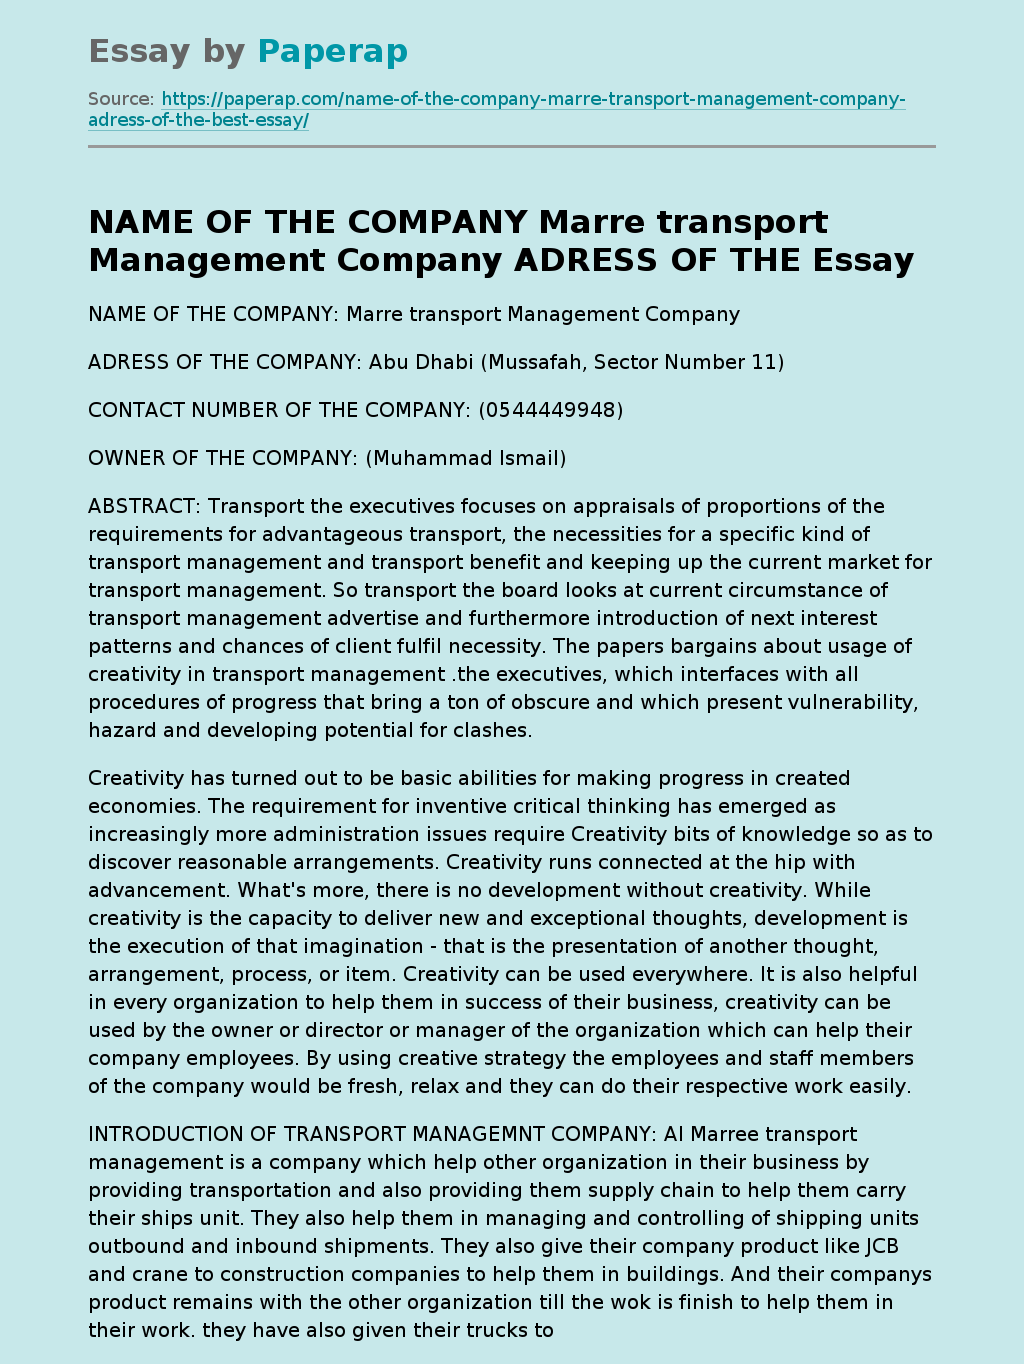 NAME OF THE COMPANY Marre transport Management Company ADRESS OF THE